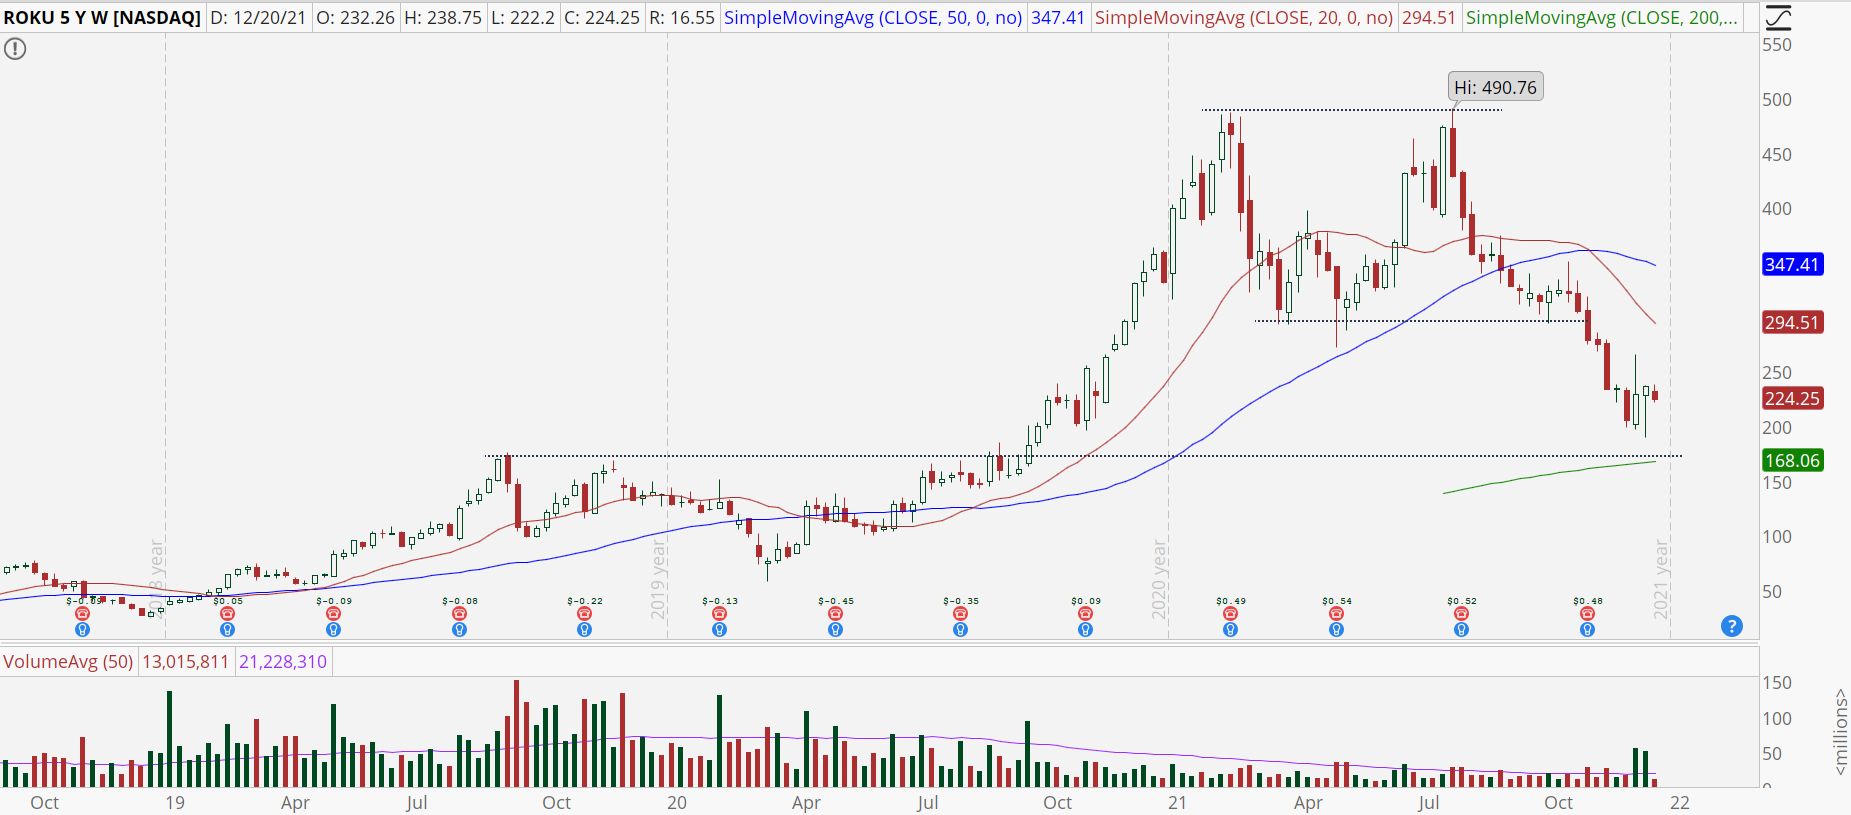 Roku (ROKU) stock weekly chart with steep downtrend.